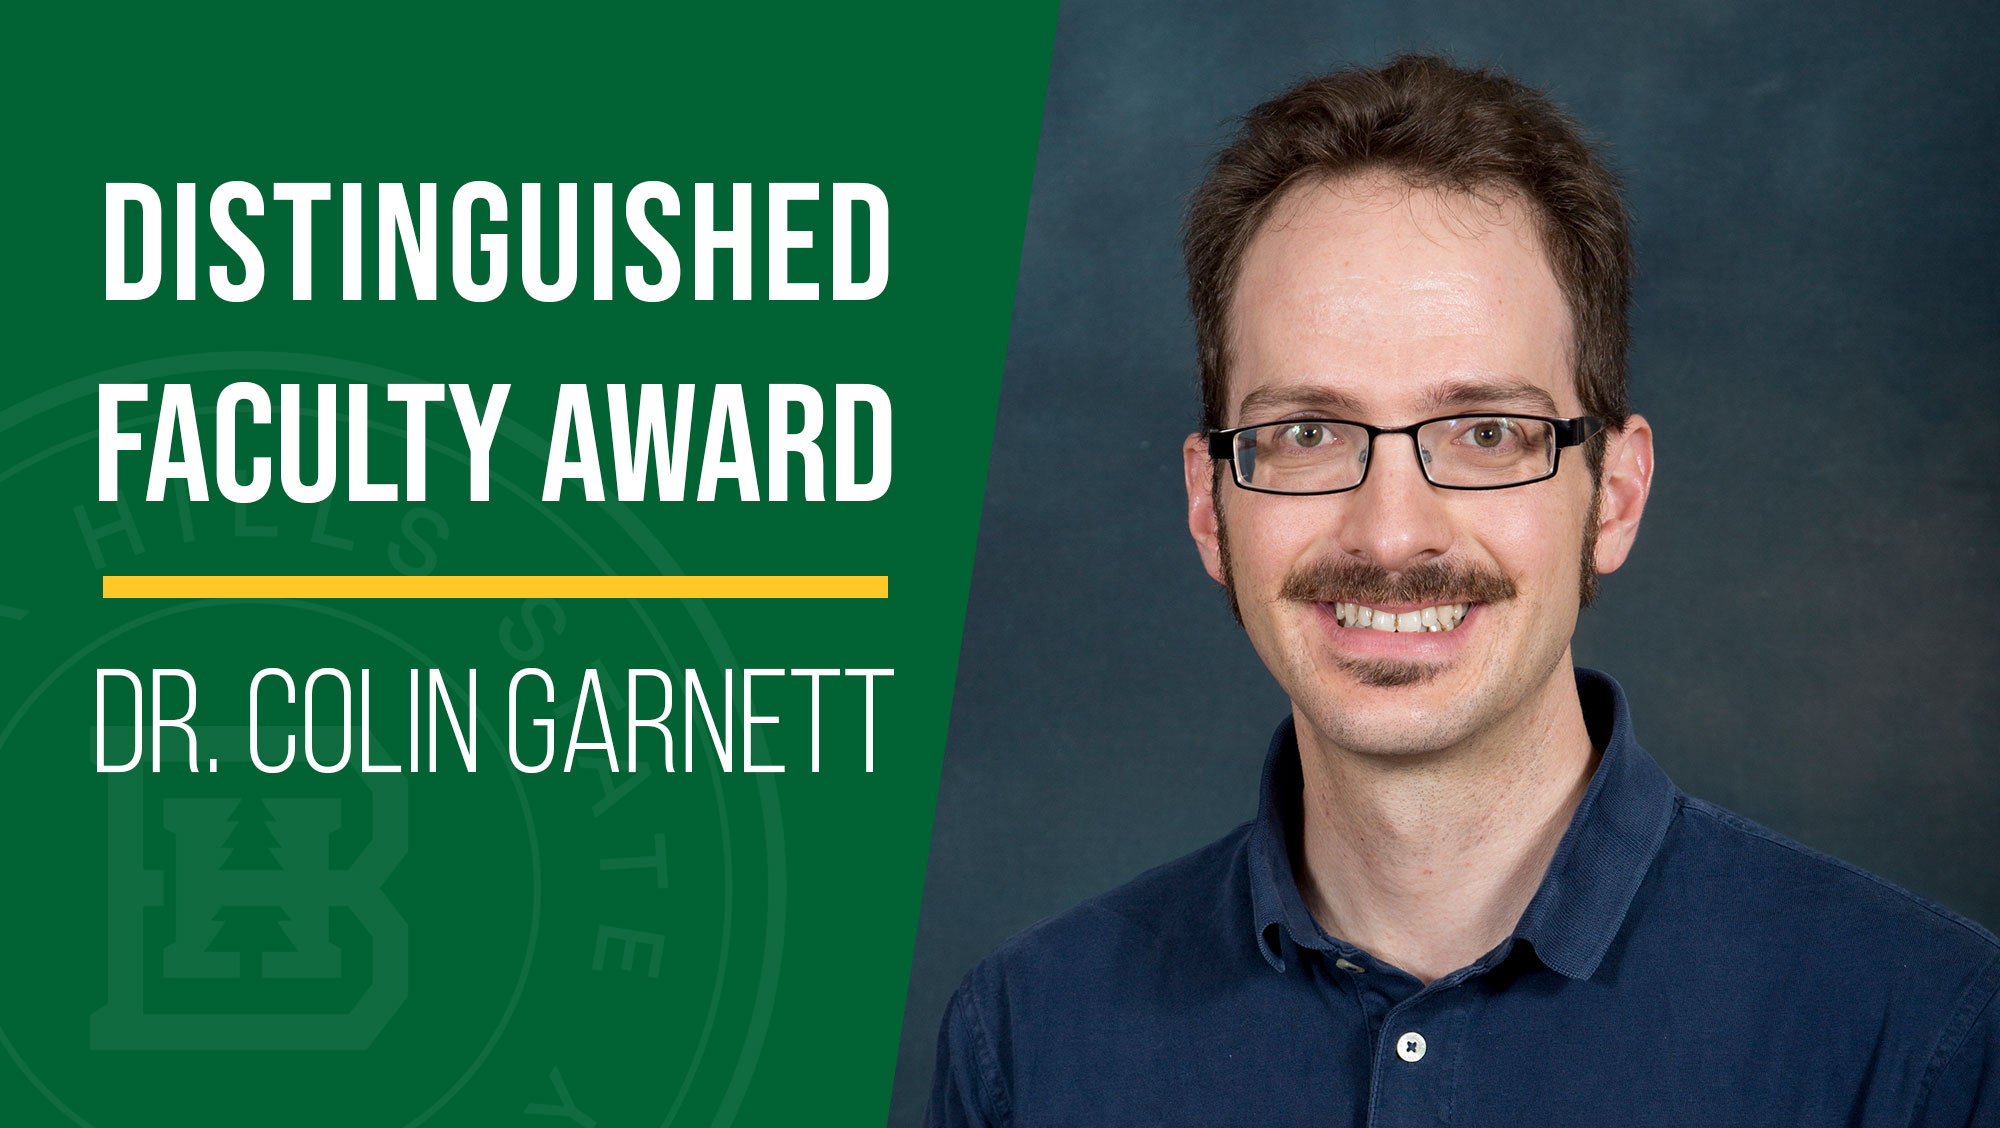 Dr. Colin Garnett was selected as distinguished faculty member at BHSU